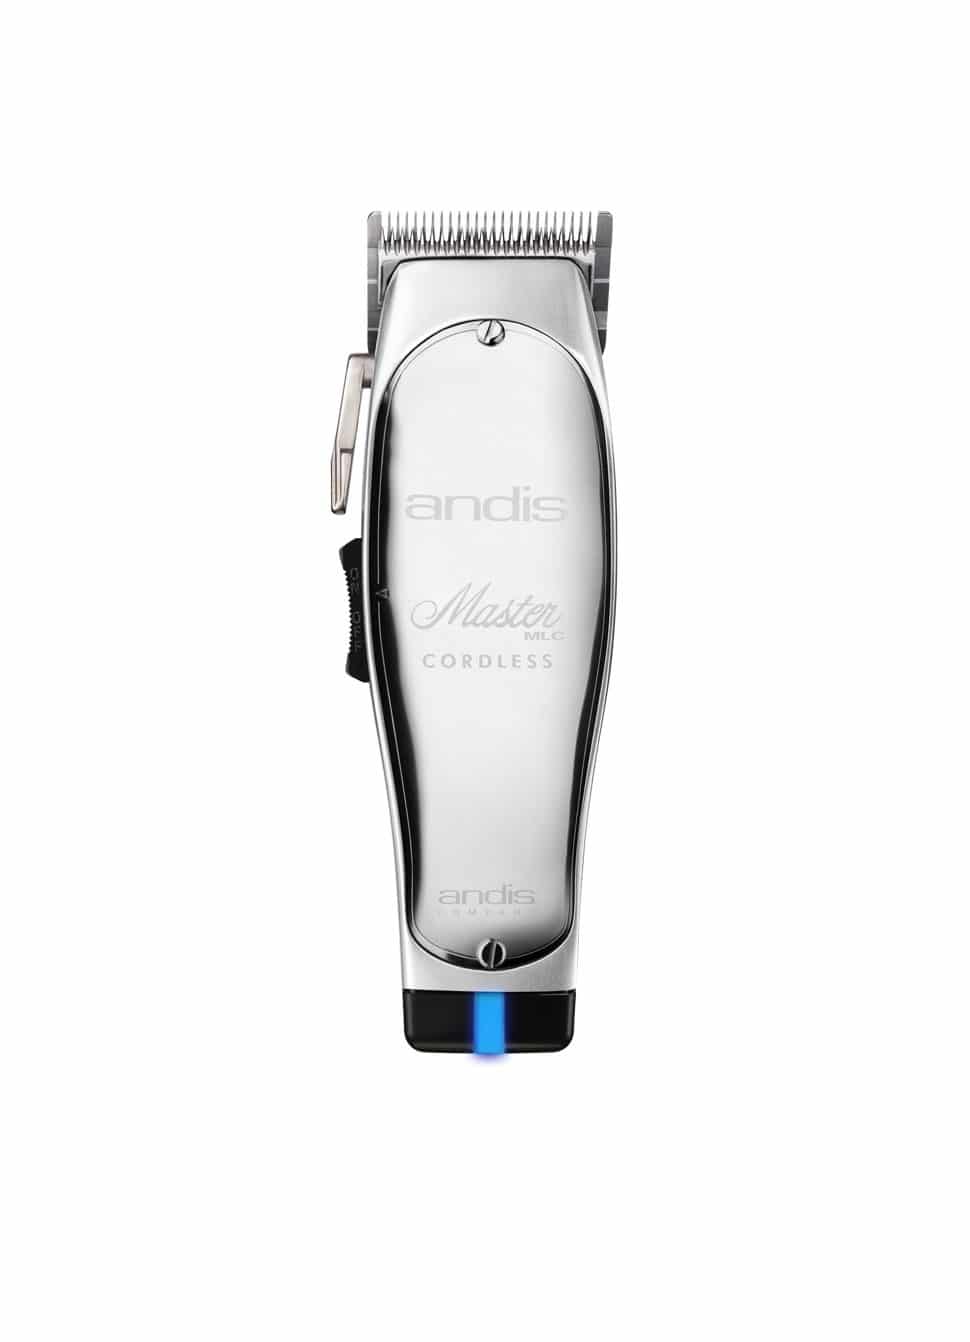 A close up of the top part of an electric hair clipper.